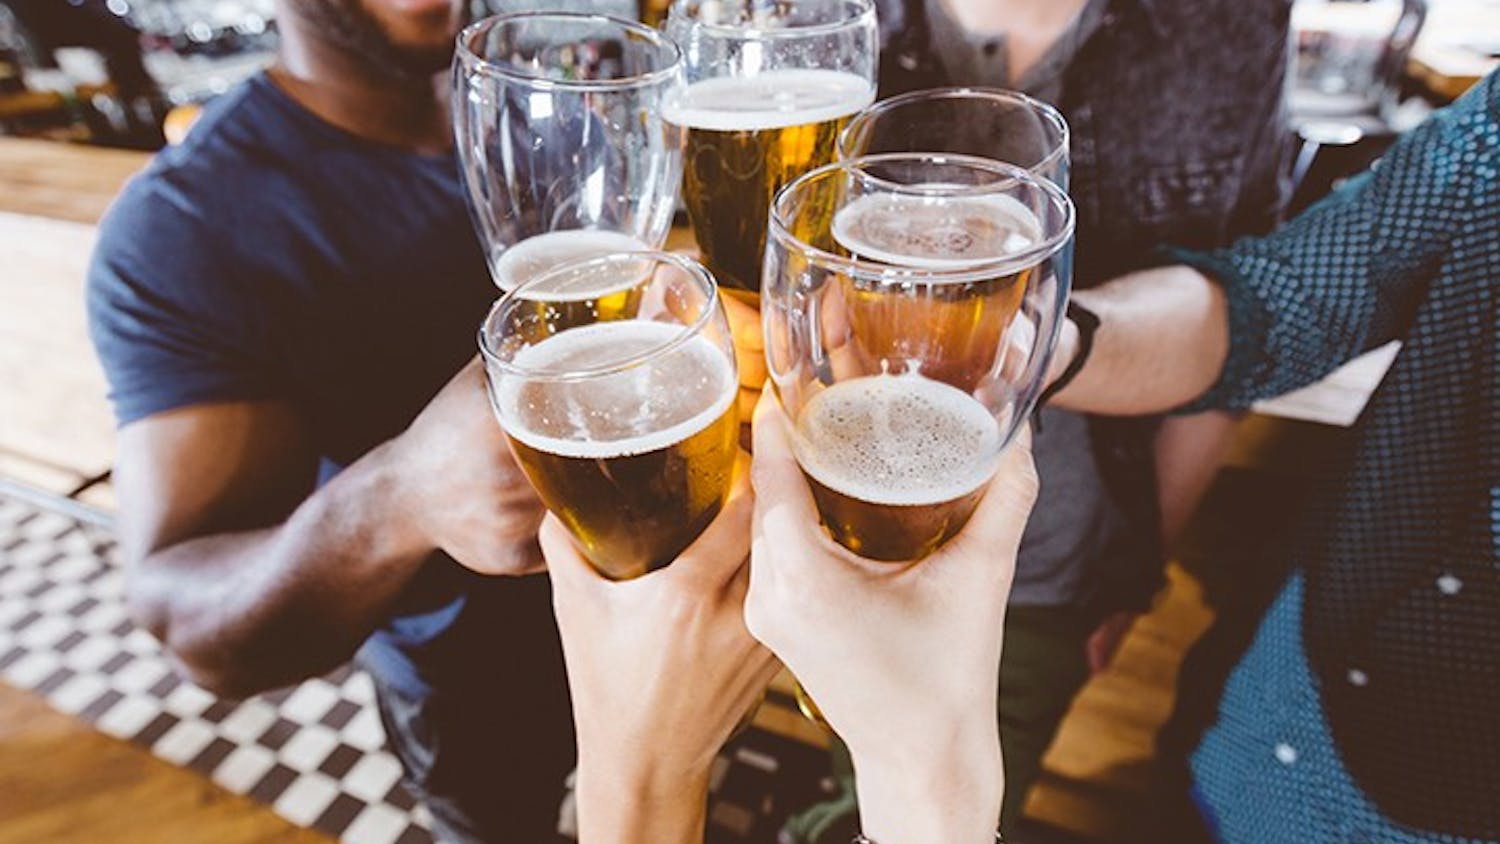  A group of people clink their glasses of beer together.